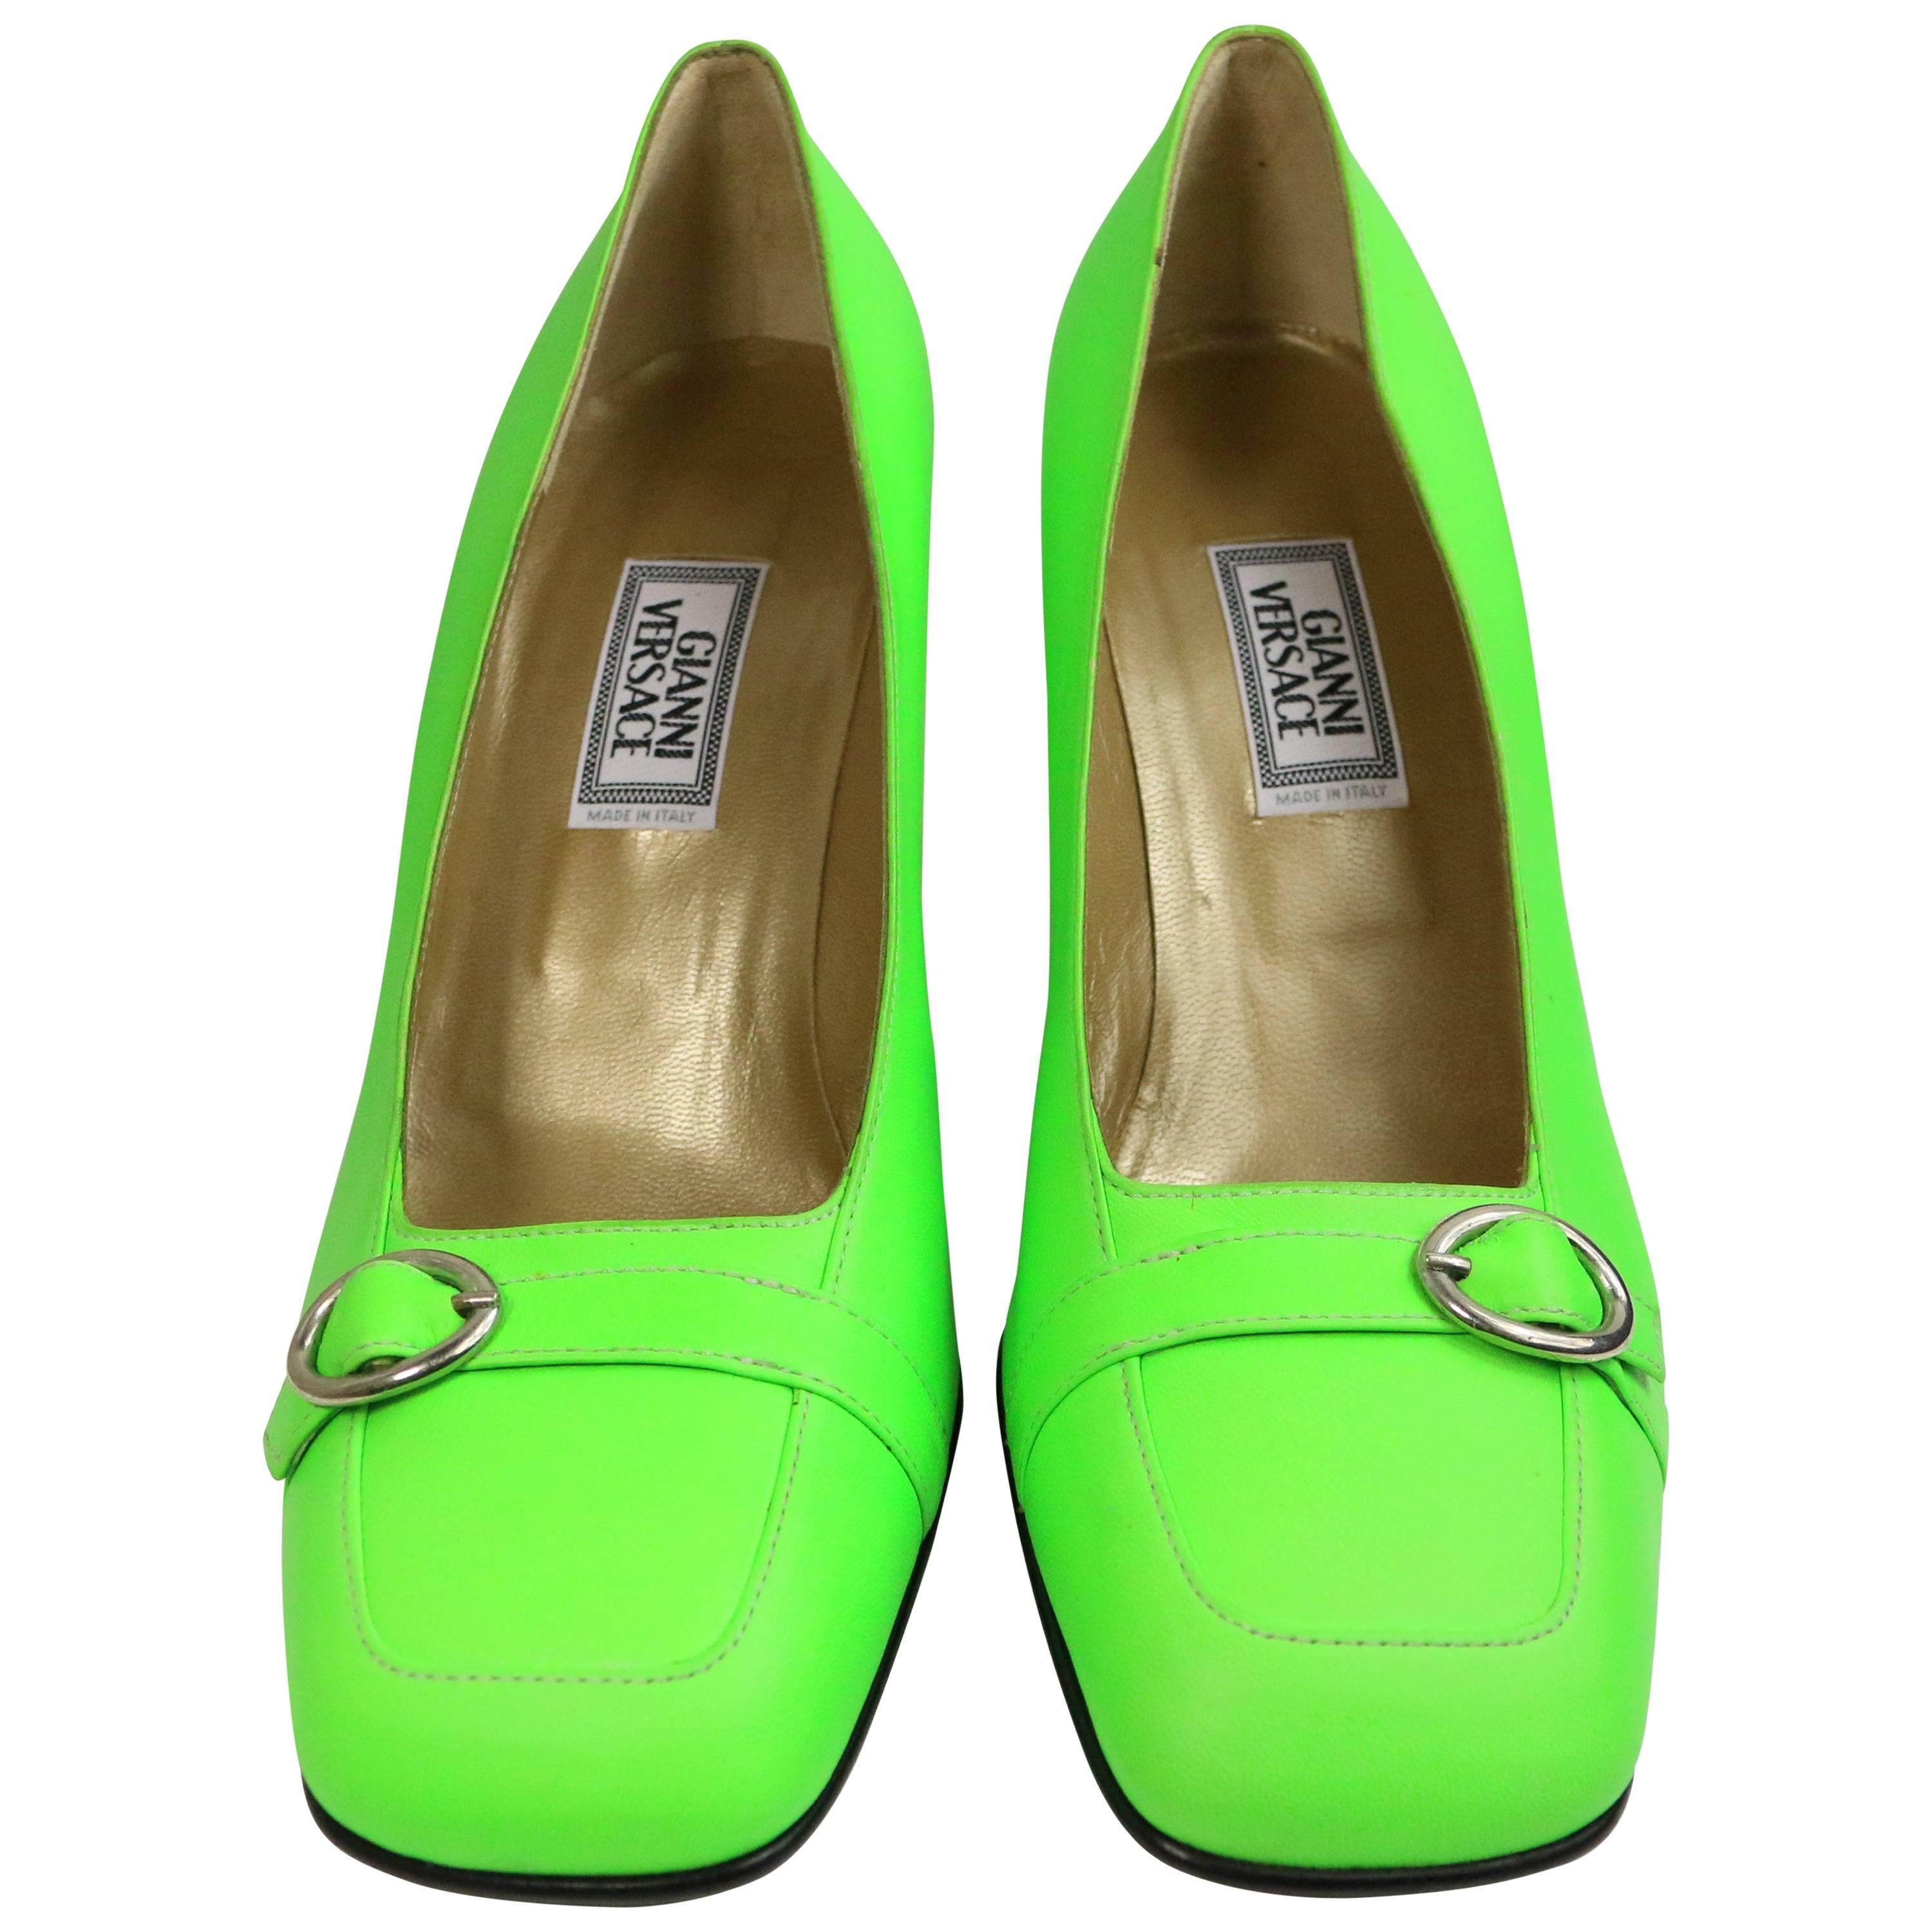 Gianni Versace Neon Green Leather Square Toe Heels For Sale